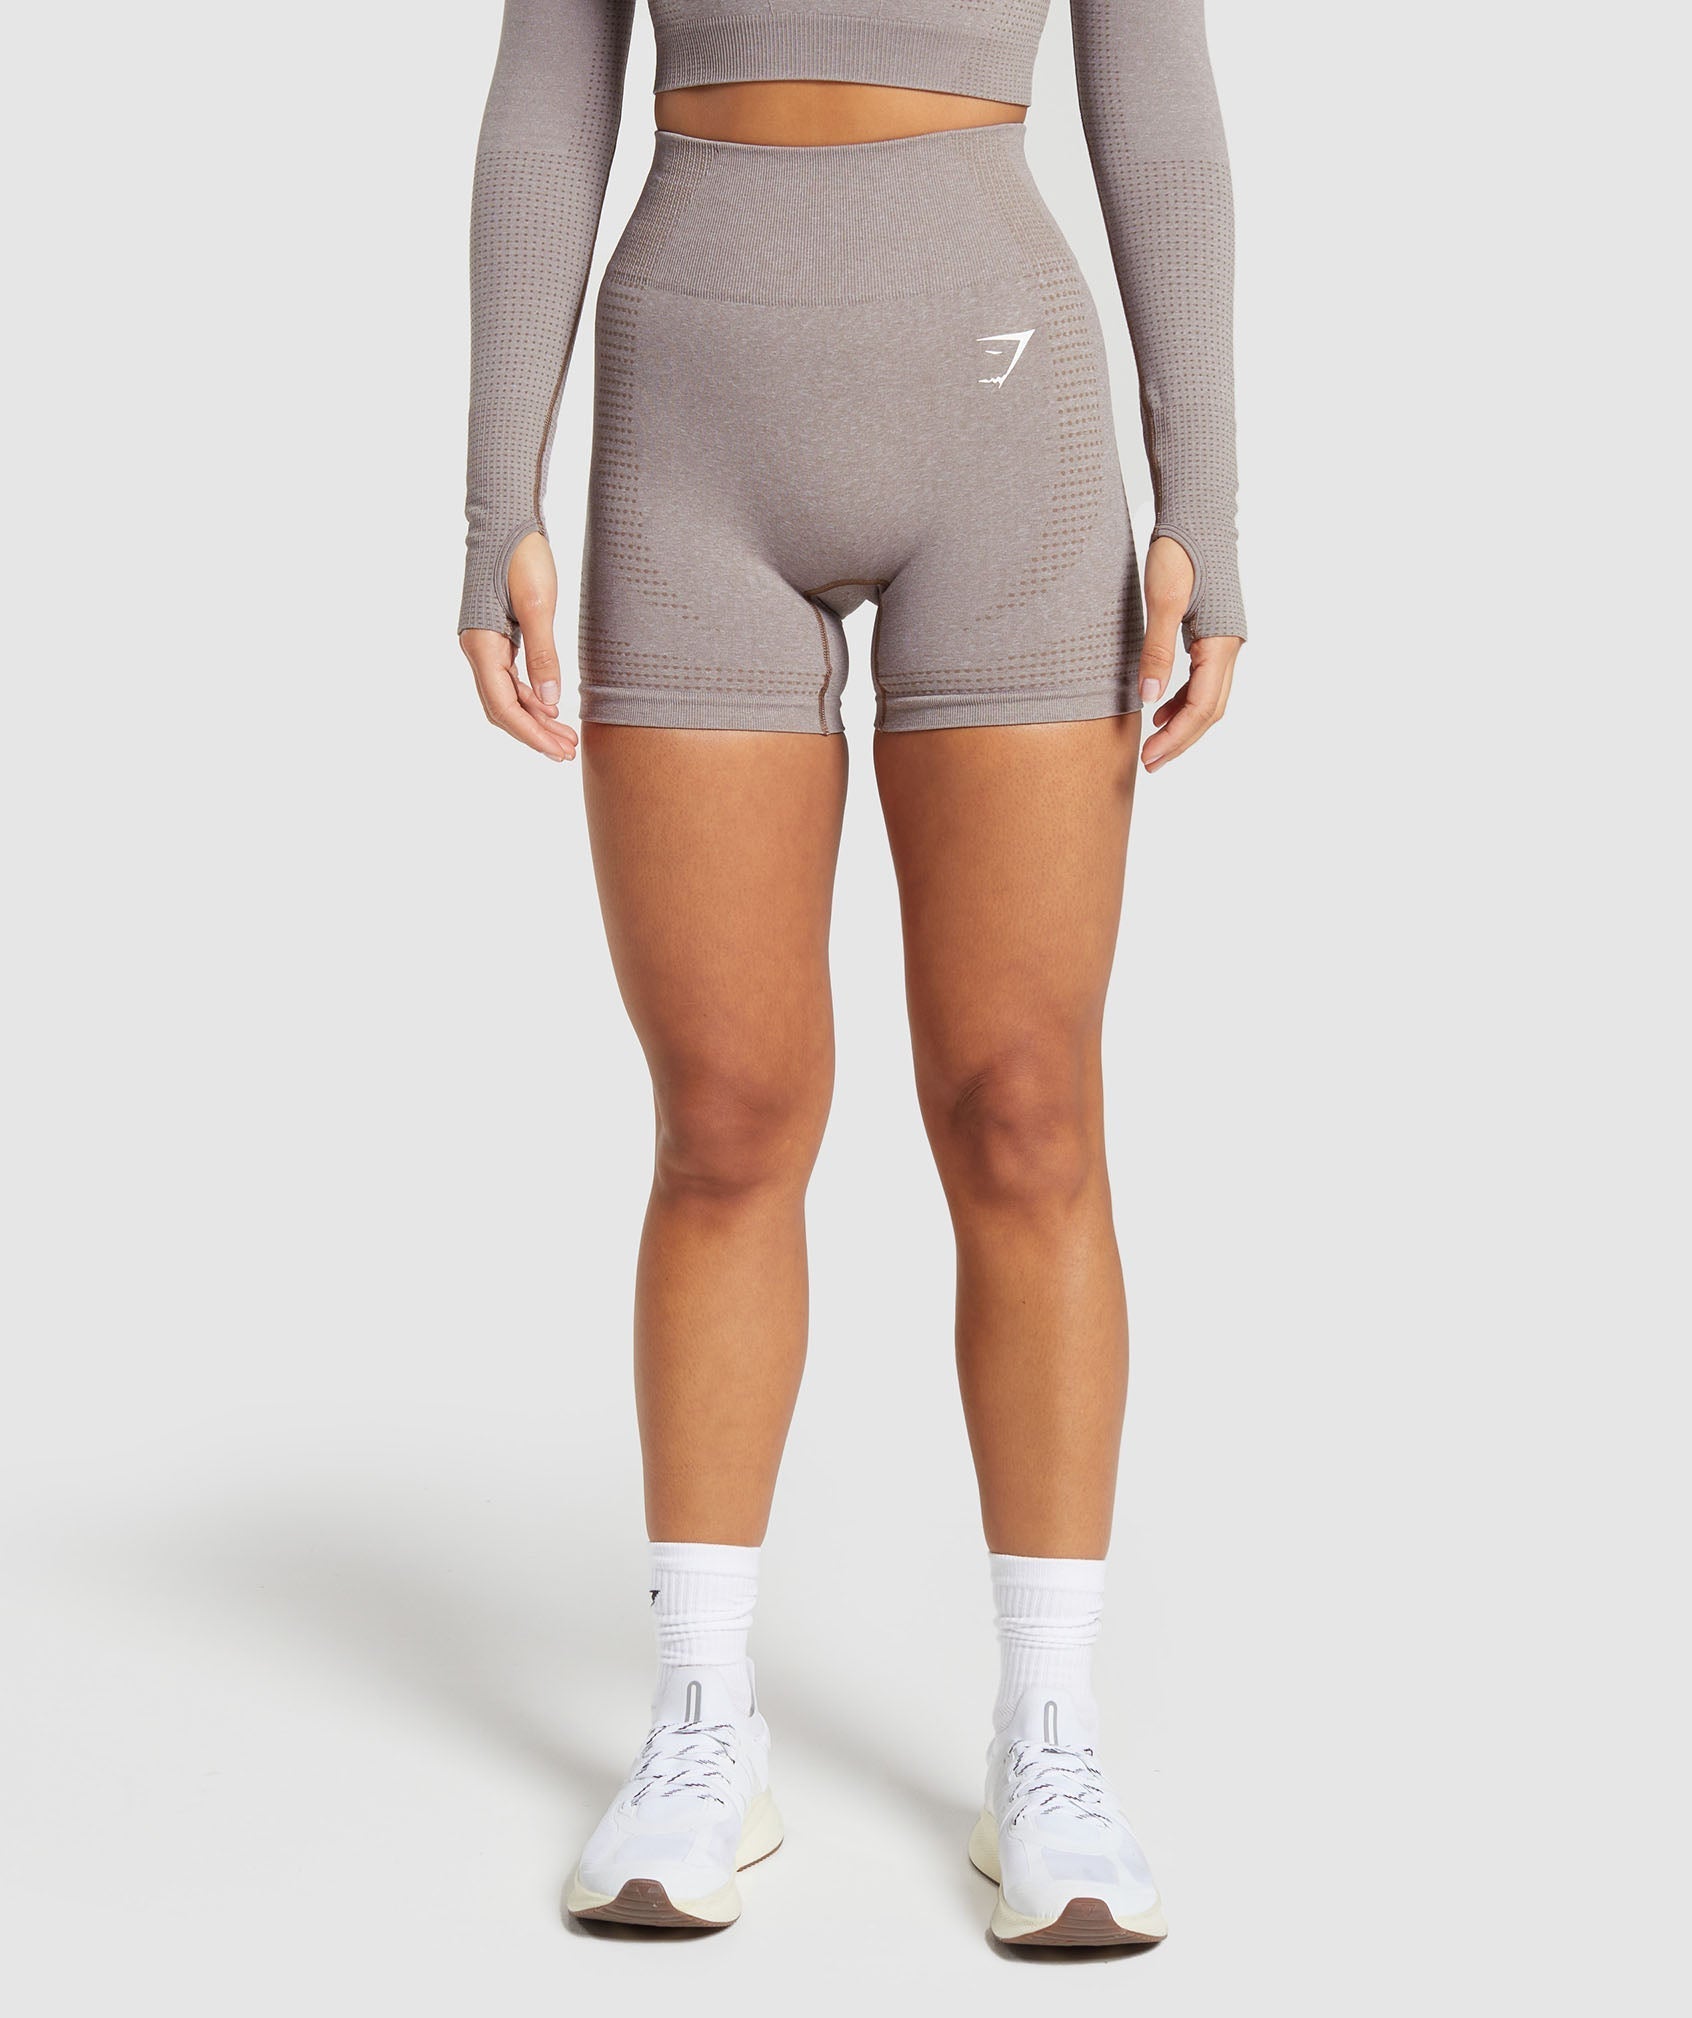 Vital Seamless 2.0 Shorts in Warm Taupe Marl - view 1